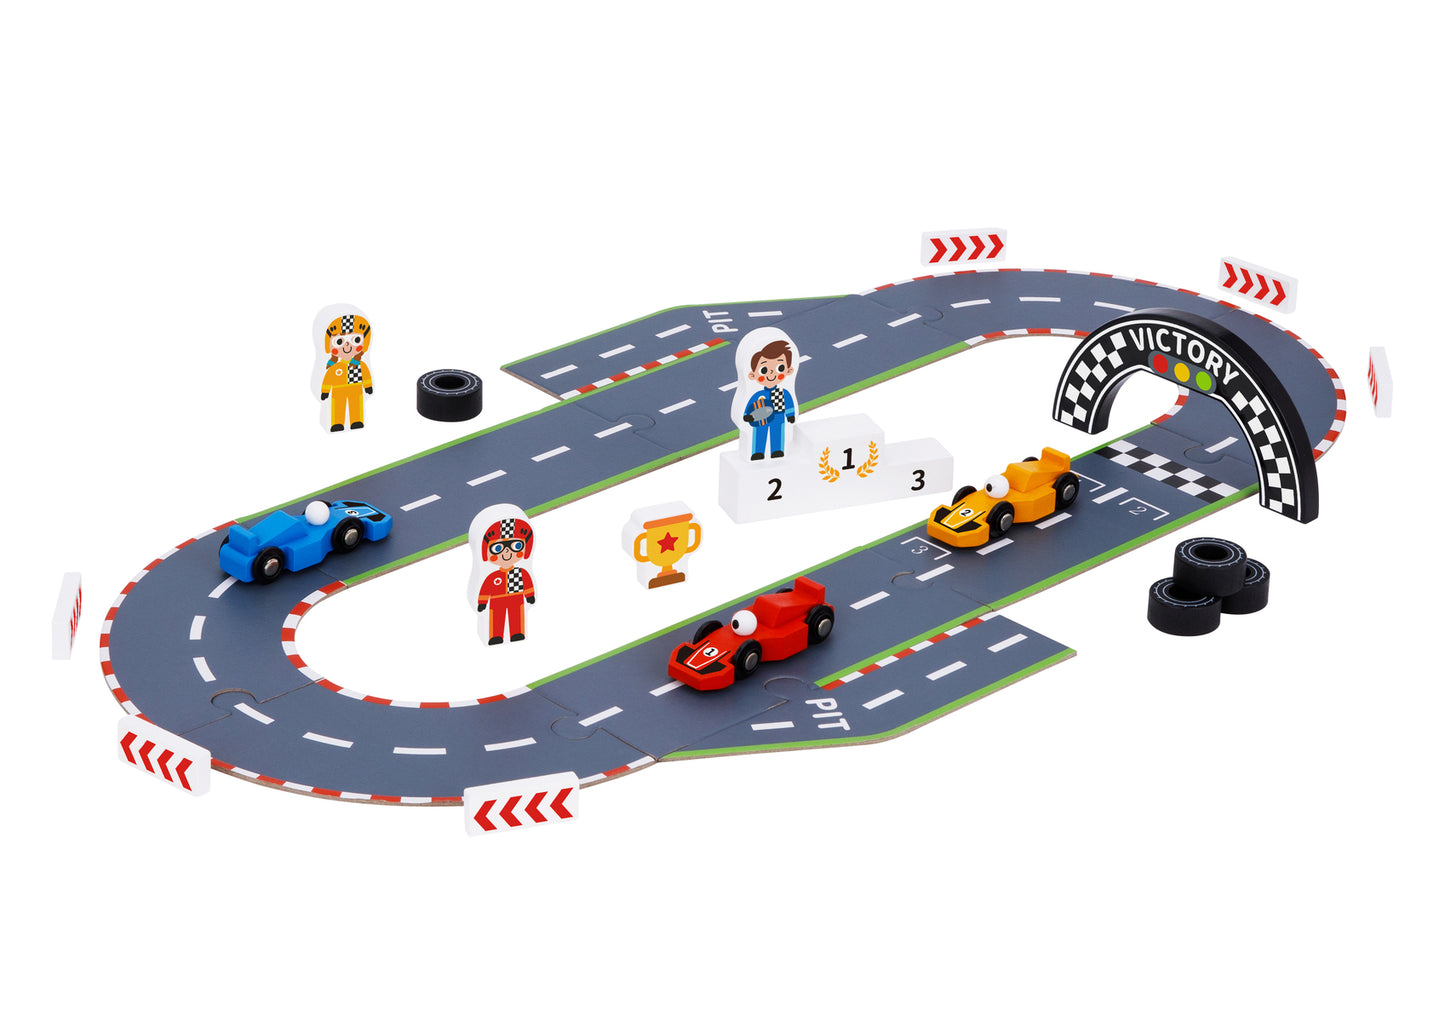 TOOKY TOY RACING GAME